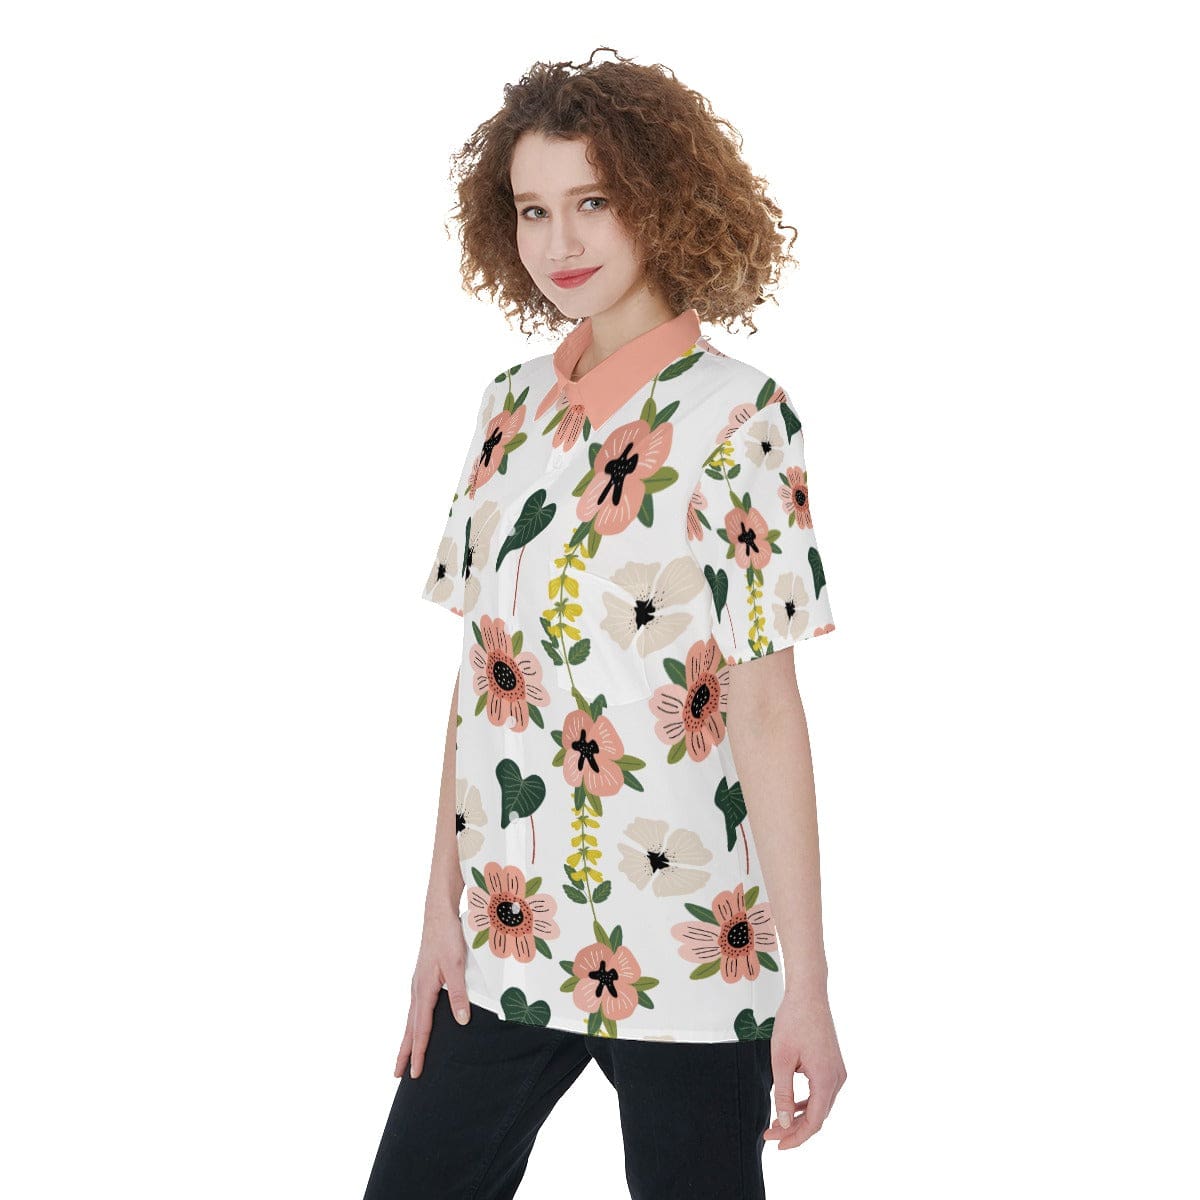 Yoycol Skirt Set Coral Floral - Women's Short Sleeve Shirt With Pocket